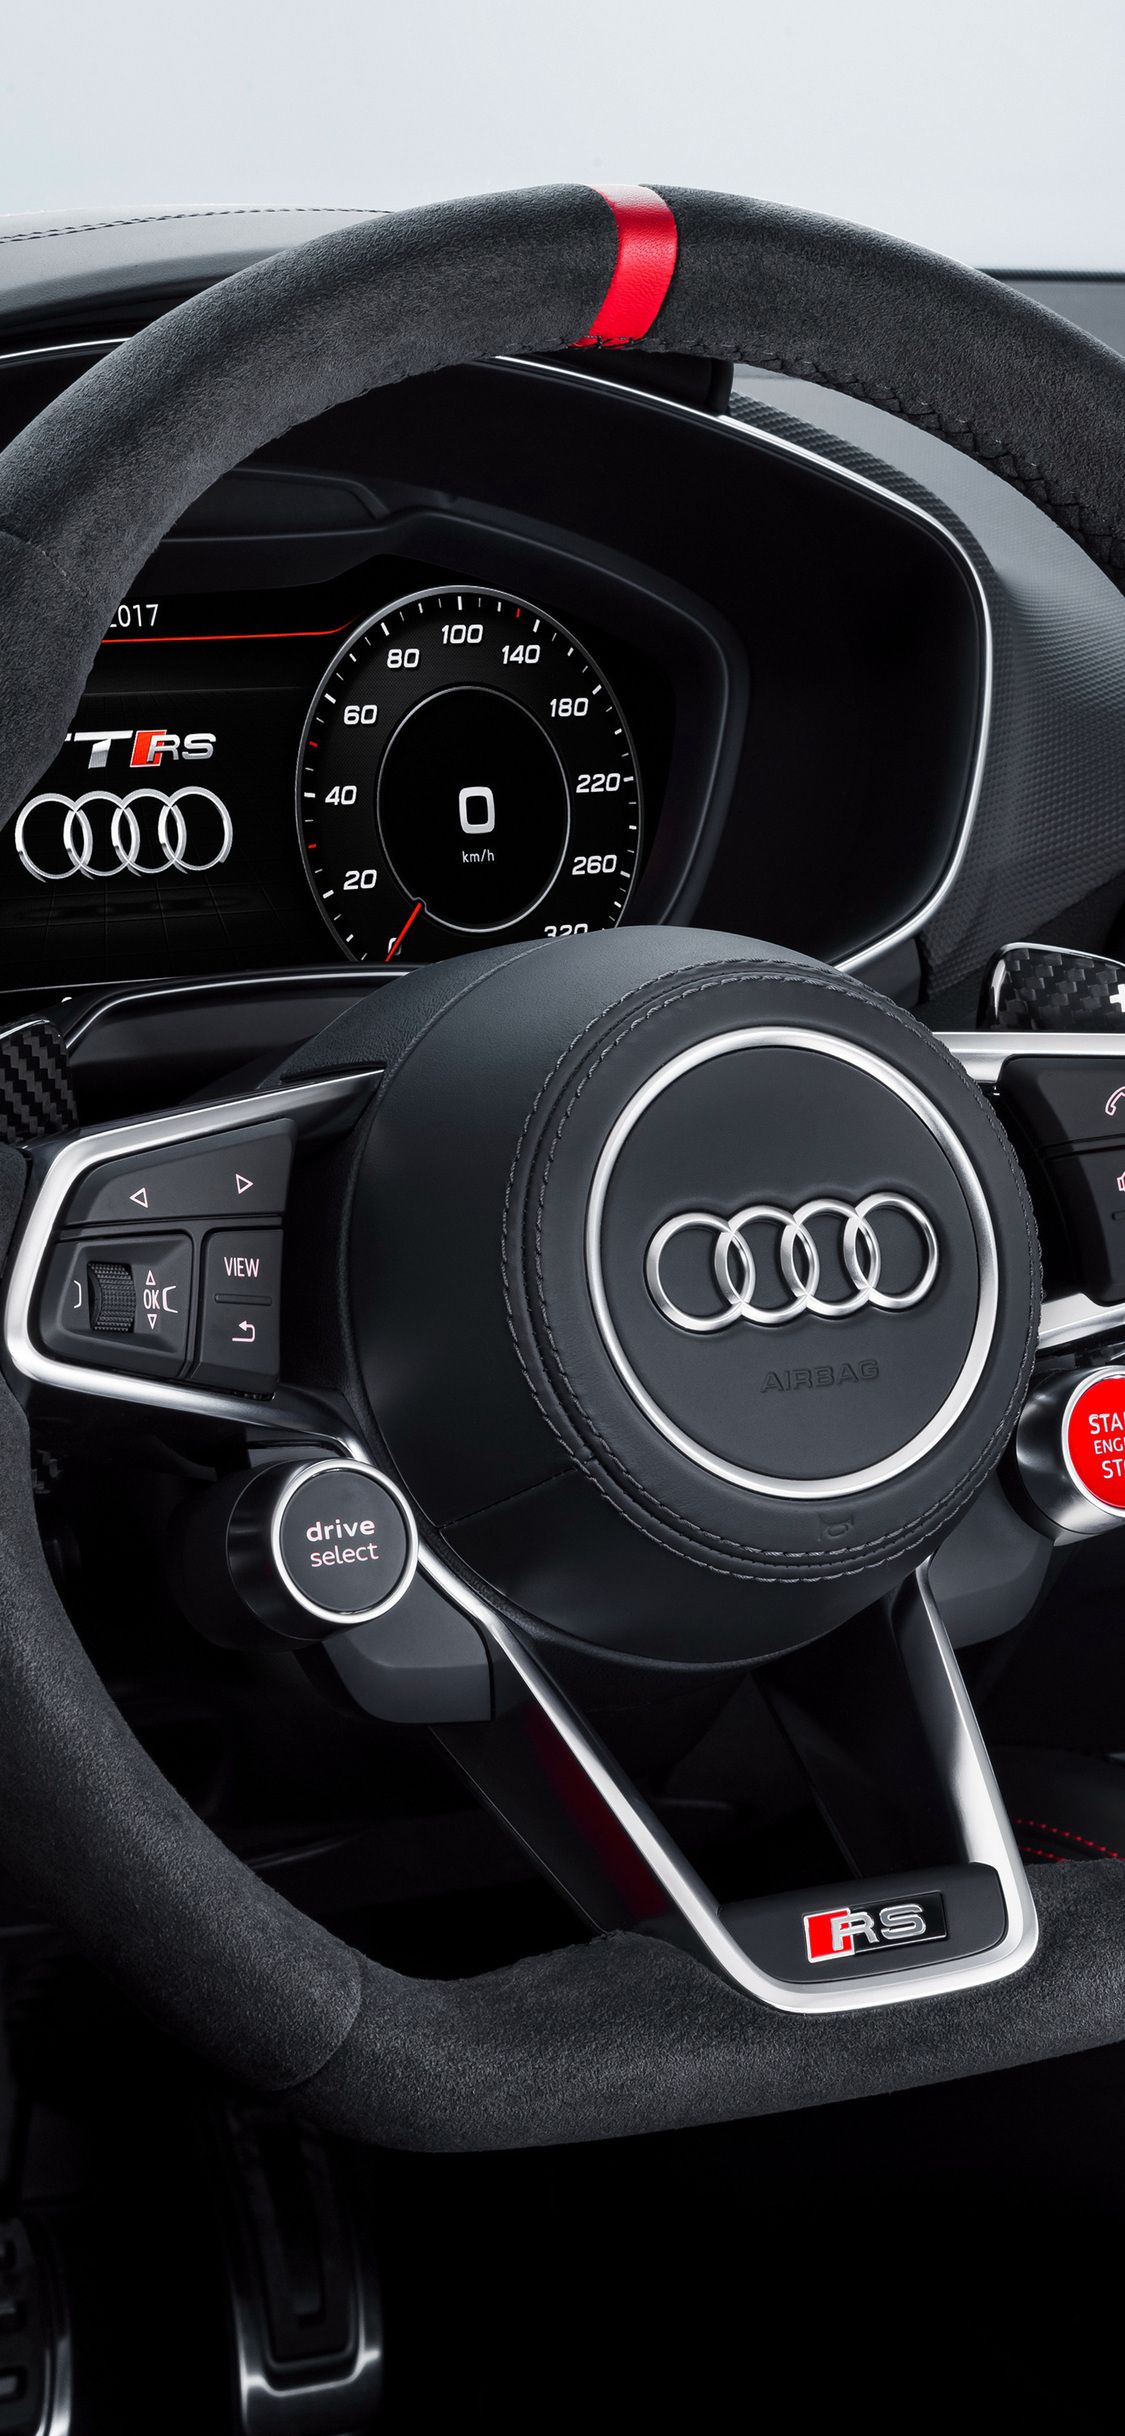 HD Audi Logo Iphone Wallpapers and image collection for Desktop